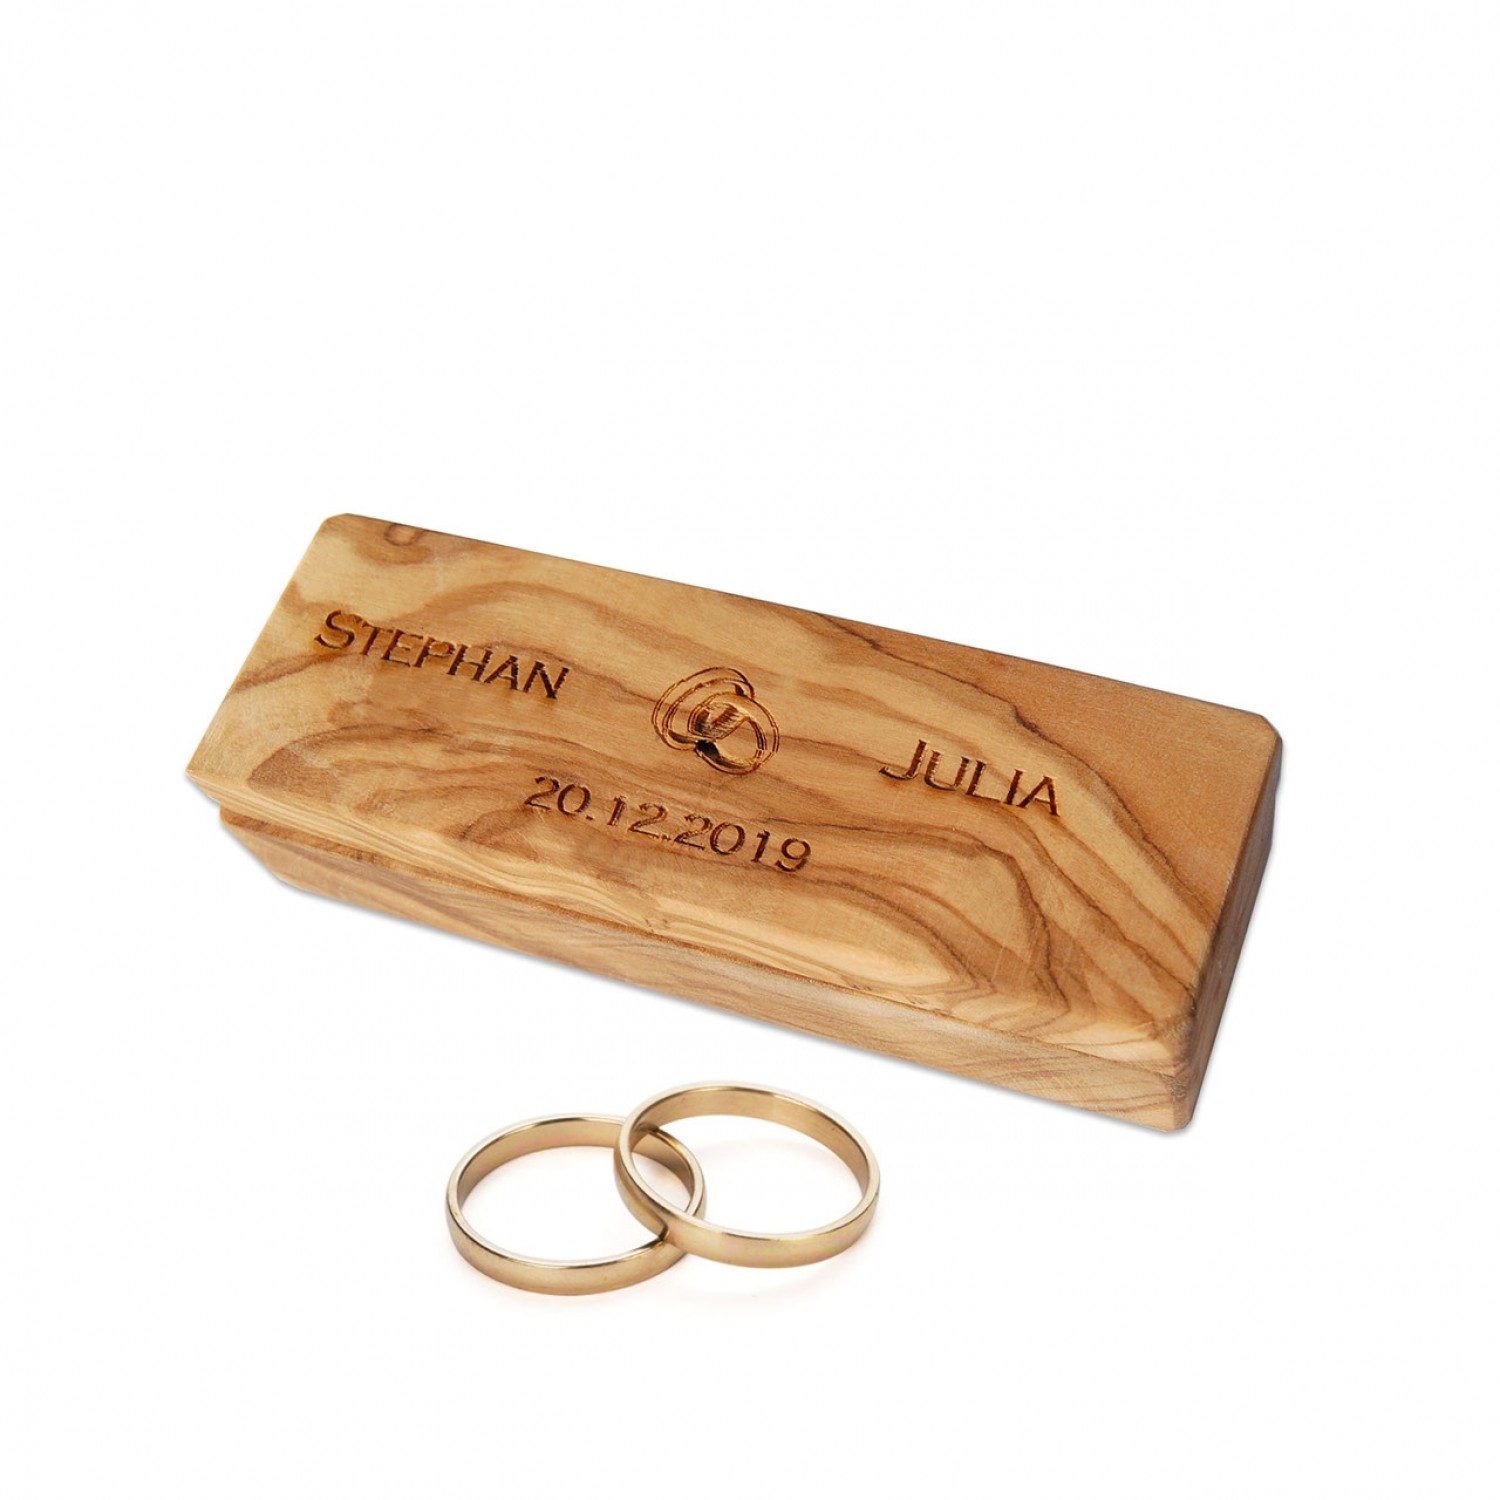 Olive wood wedding ring bearer box with personalised engraving » D.O.M.